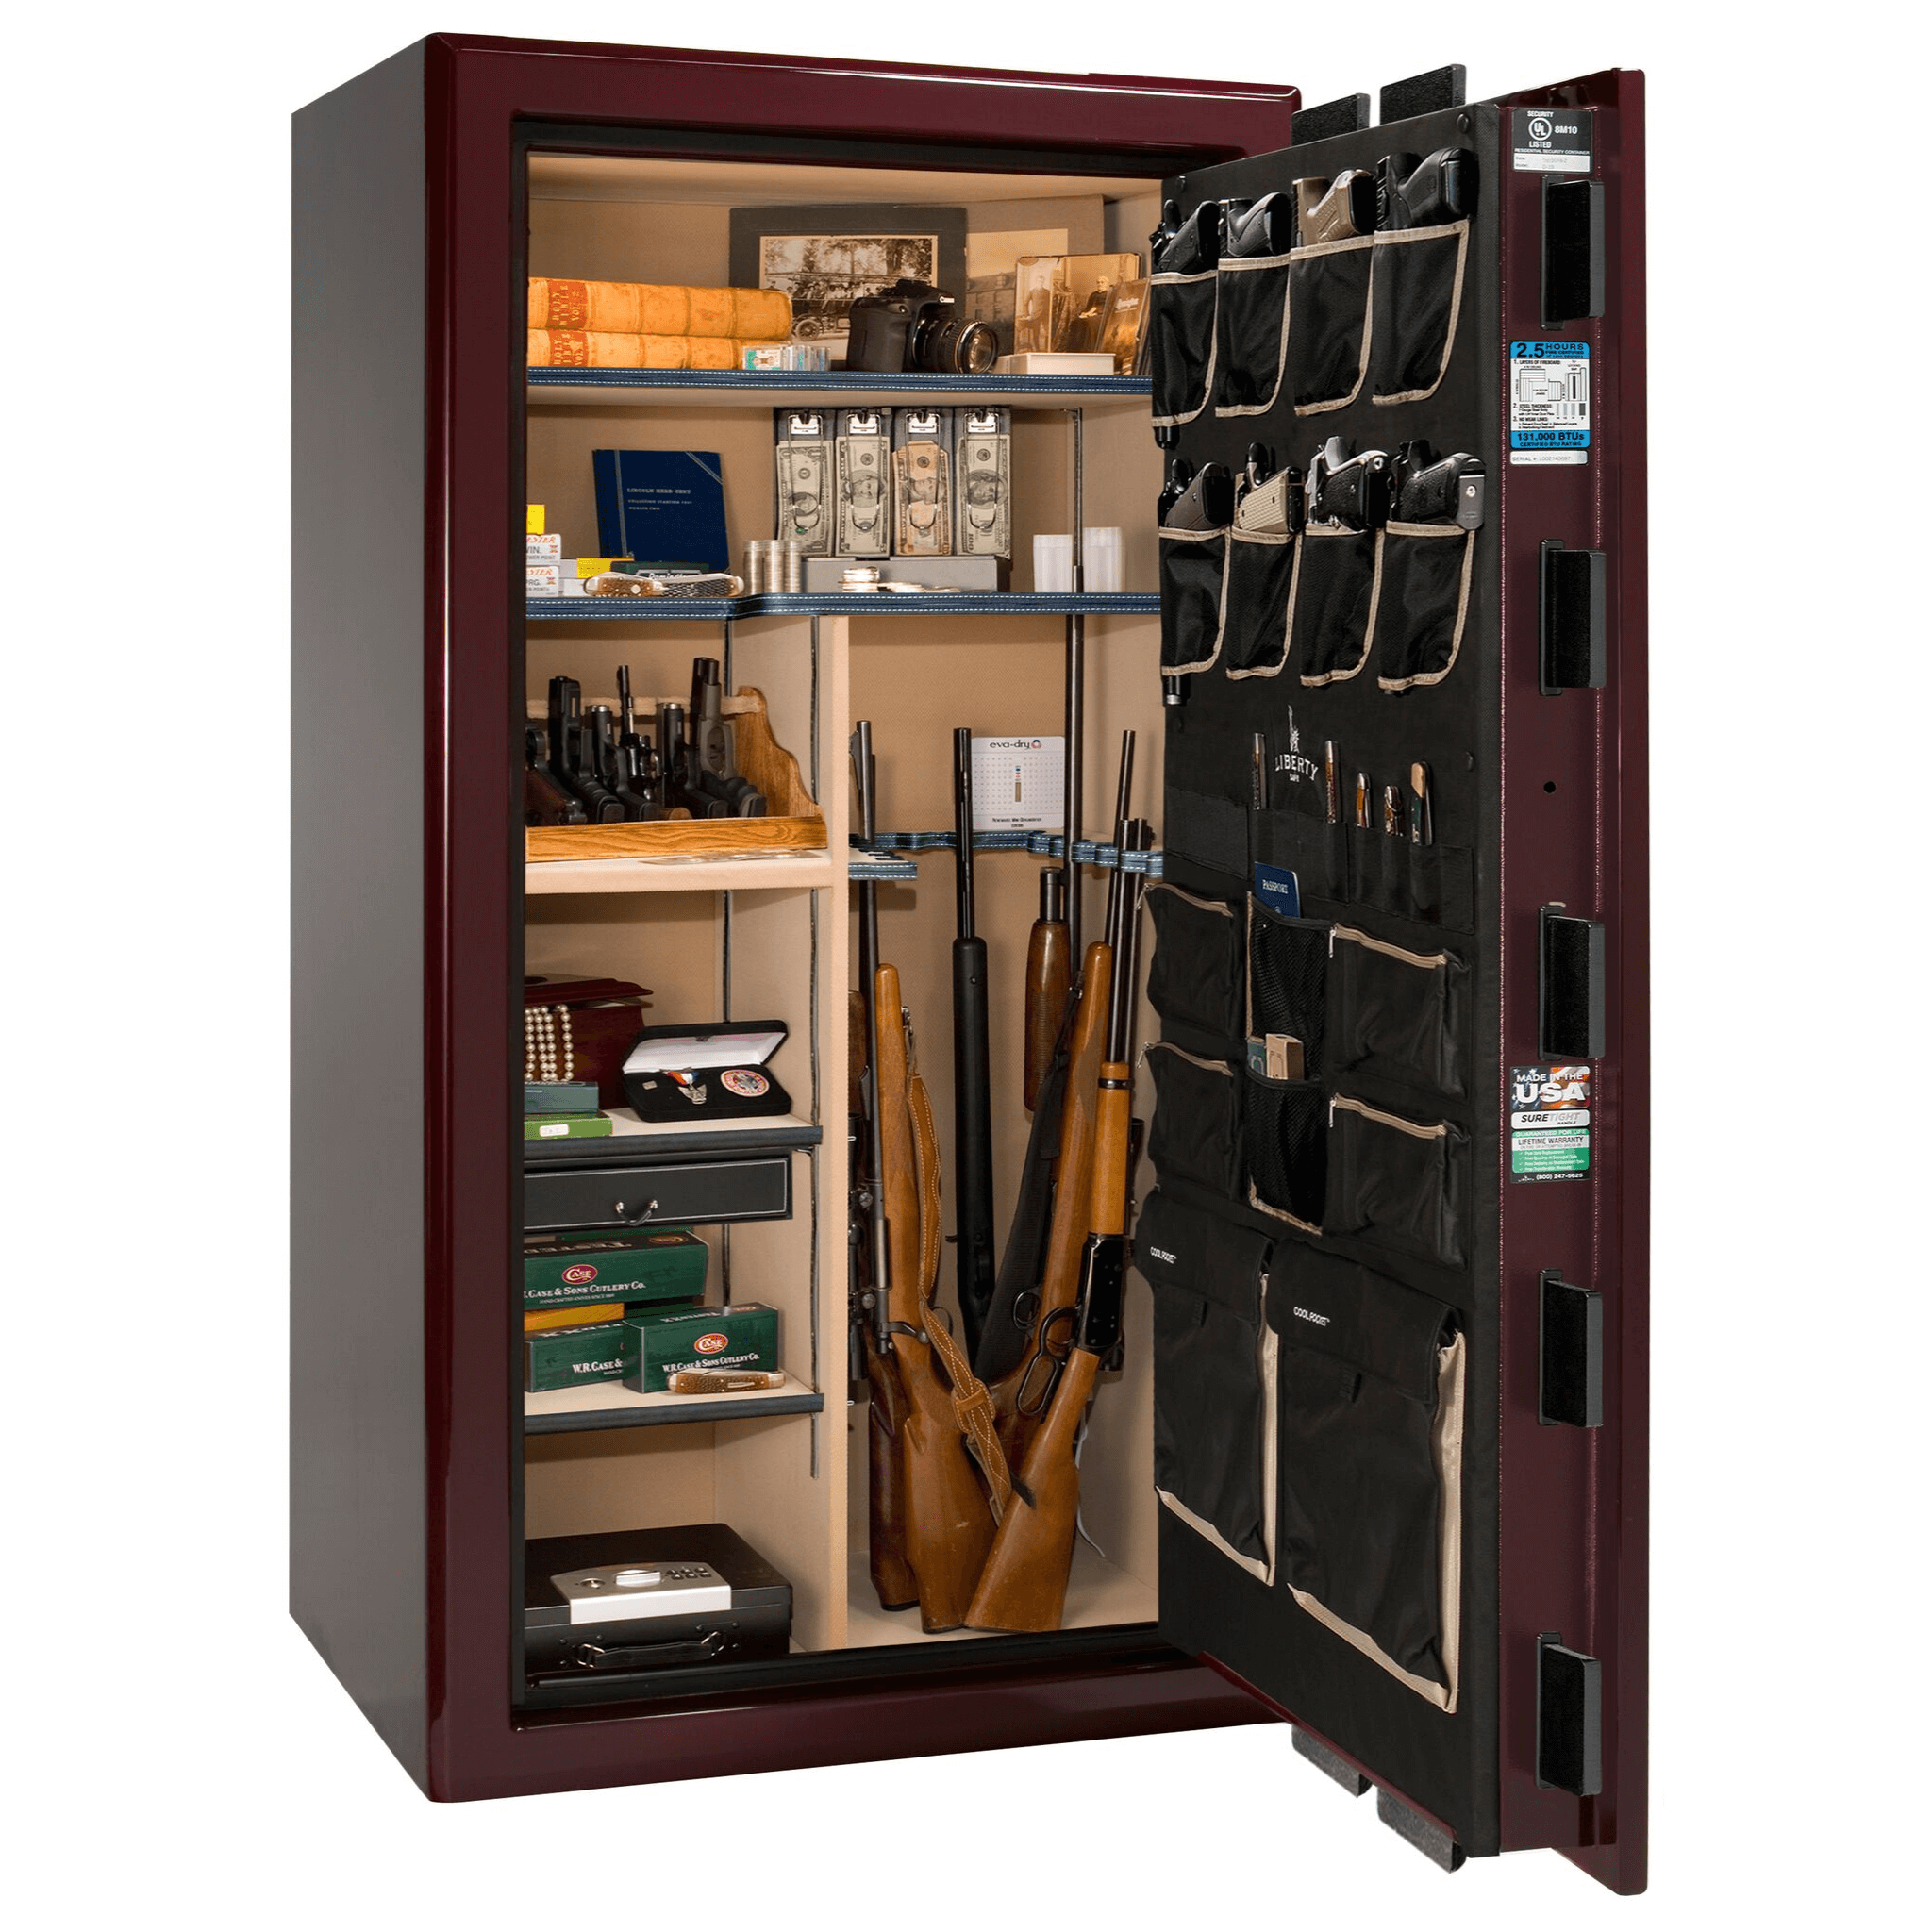 Presidential Series | Level 8 Security | 2.5 Hours Fire Protection | 40 | Dimensions: 66.5"(H) x 36.25"(W) x 32"(D) | Burgundy Gloss | Gold Hardware | Mechanical Lock